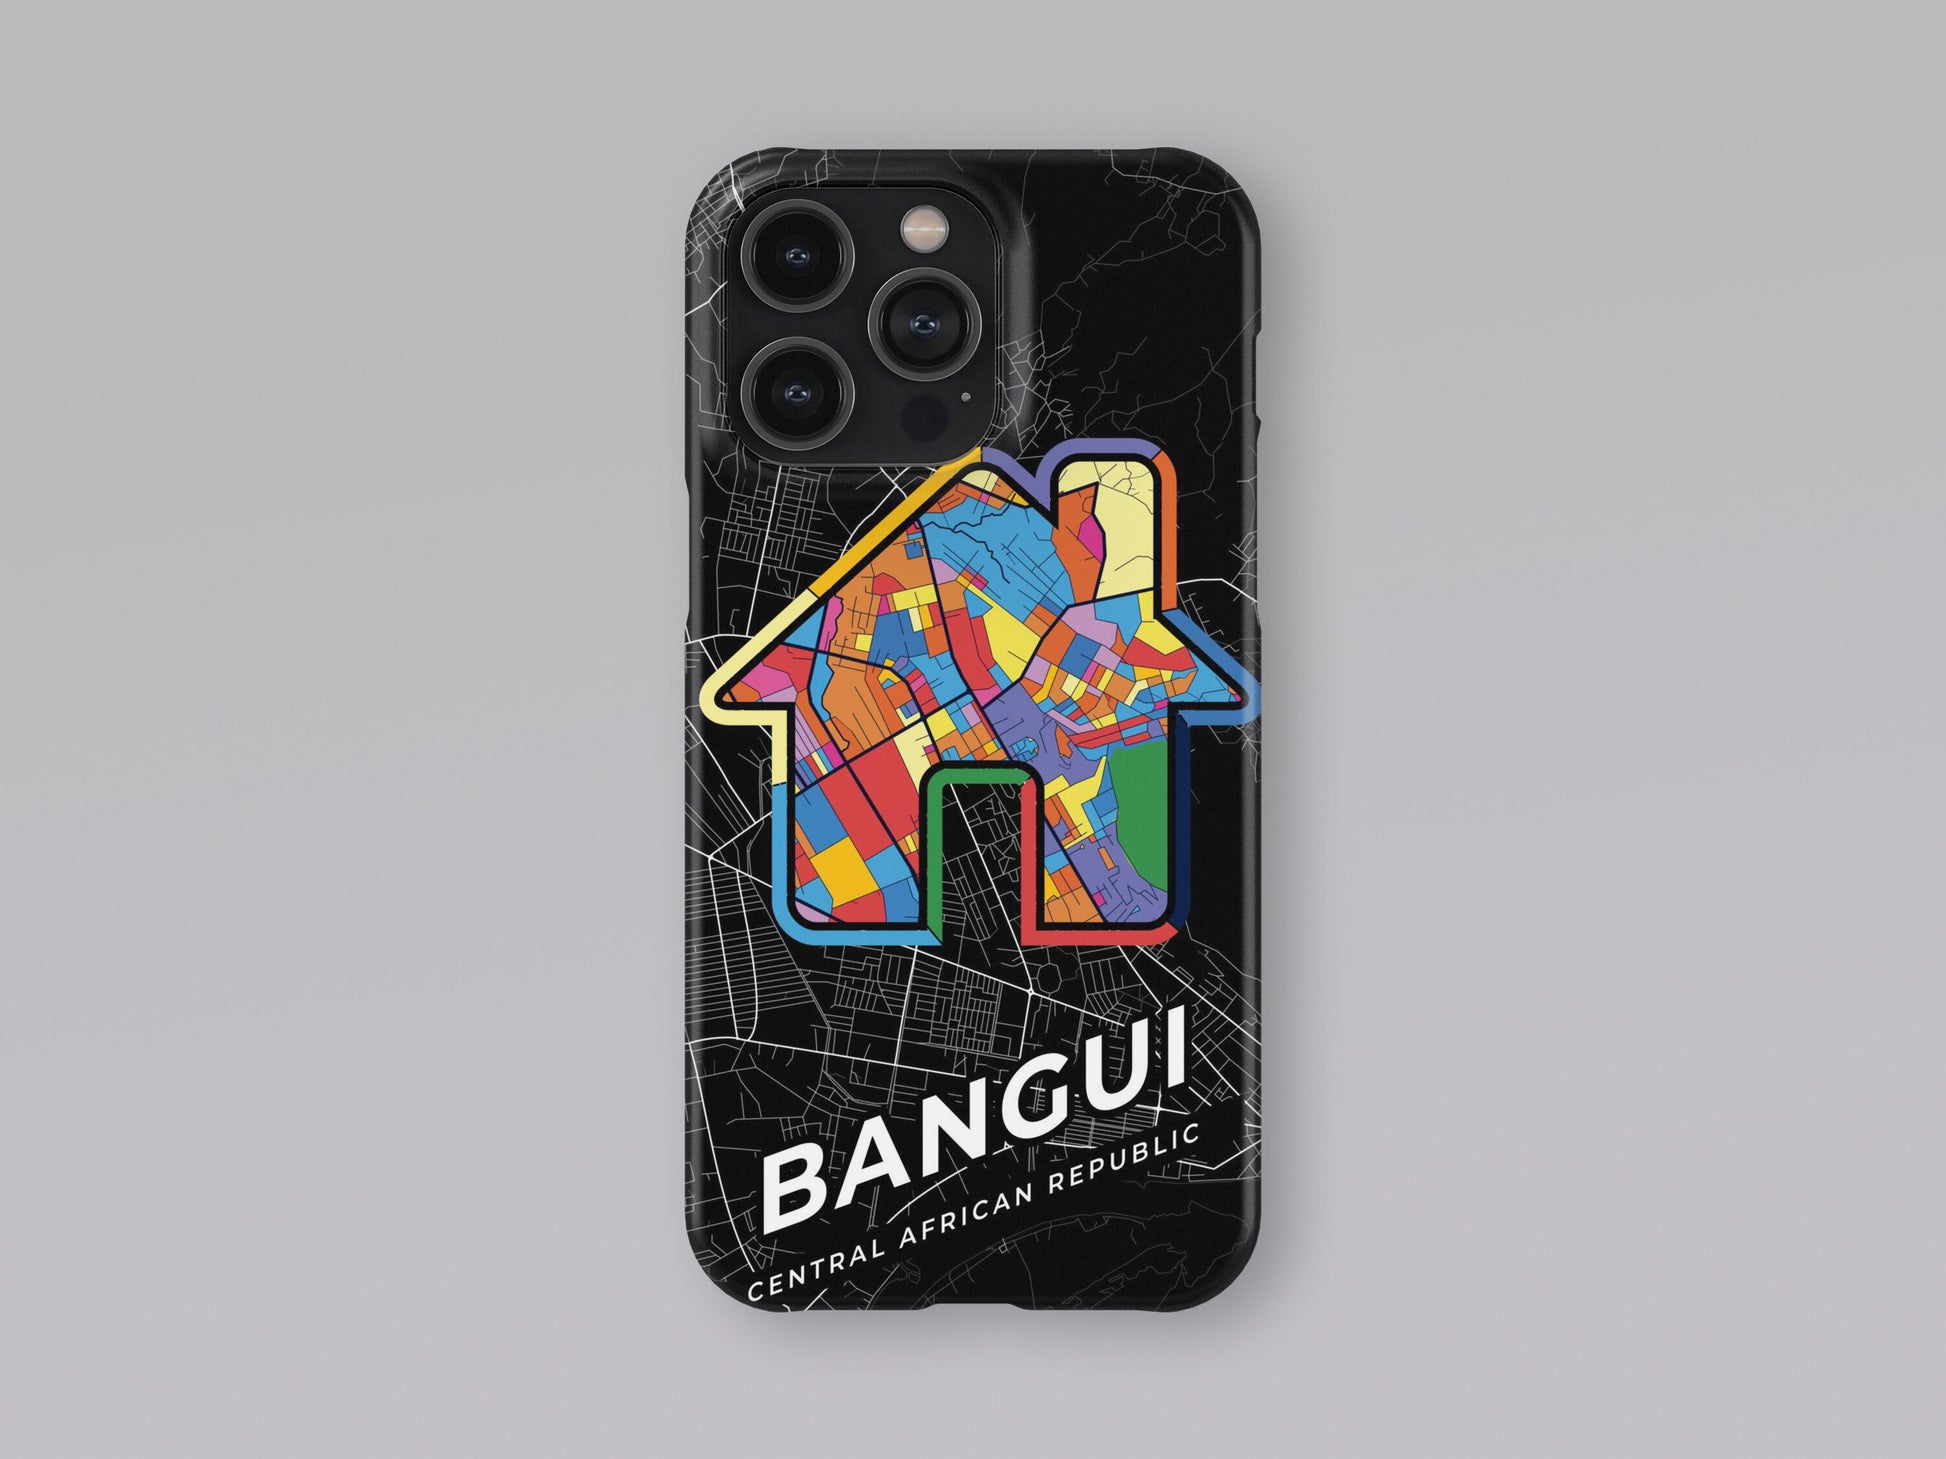 Bangui Central African Republic slim phone case with colorful icon. Birthday, wedding or housewarming gift. Couple match cases. 3